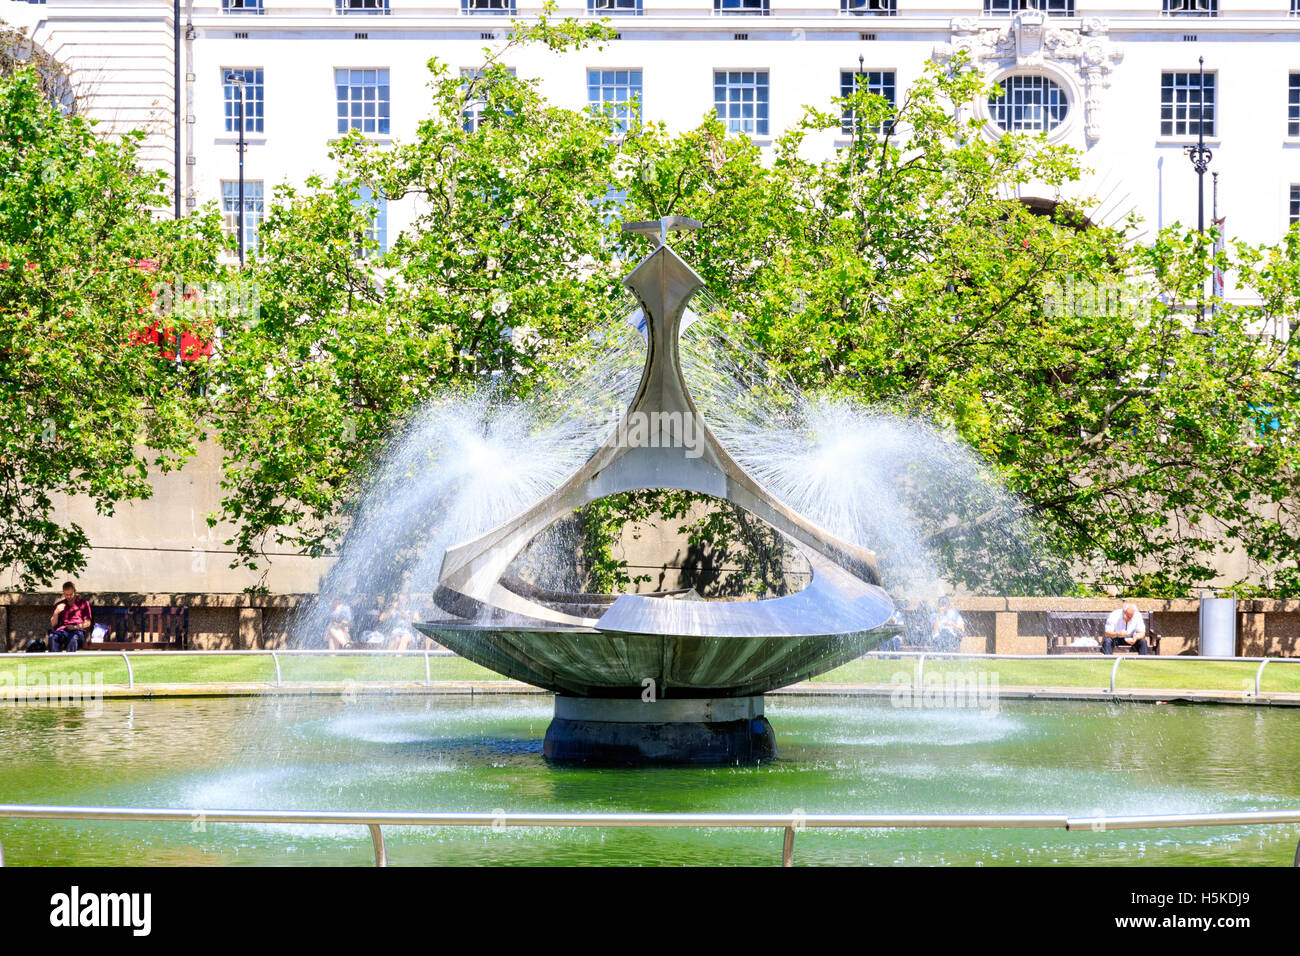 London, UK - July 19, 2016 - The fountain, named as Revolving Torsion, in Gabo Fountain Garden at St Thomas’s Hospital in London Stock Photo